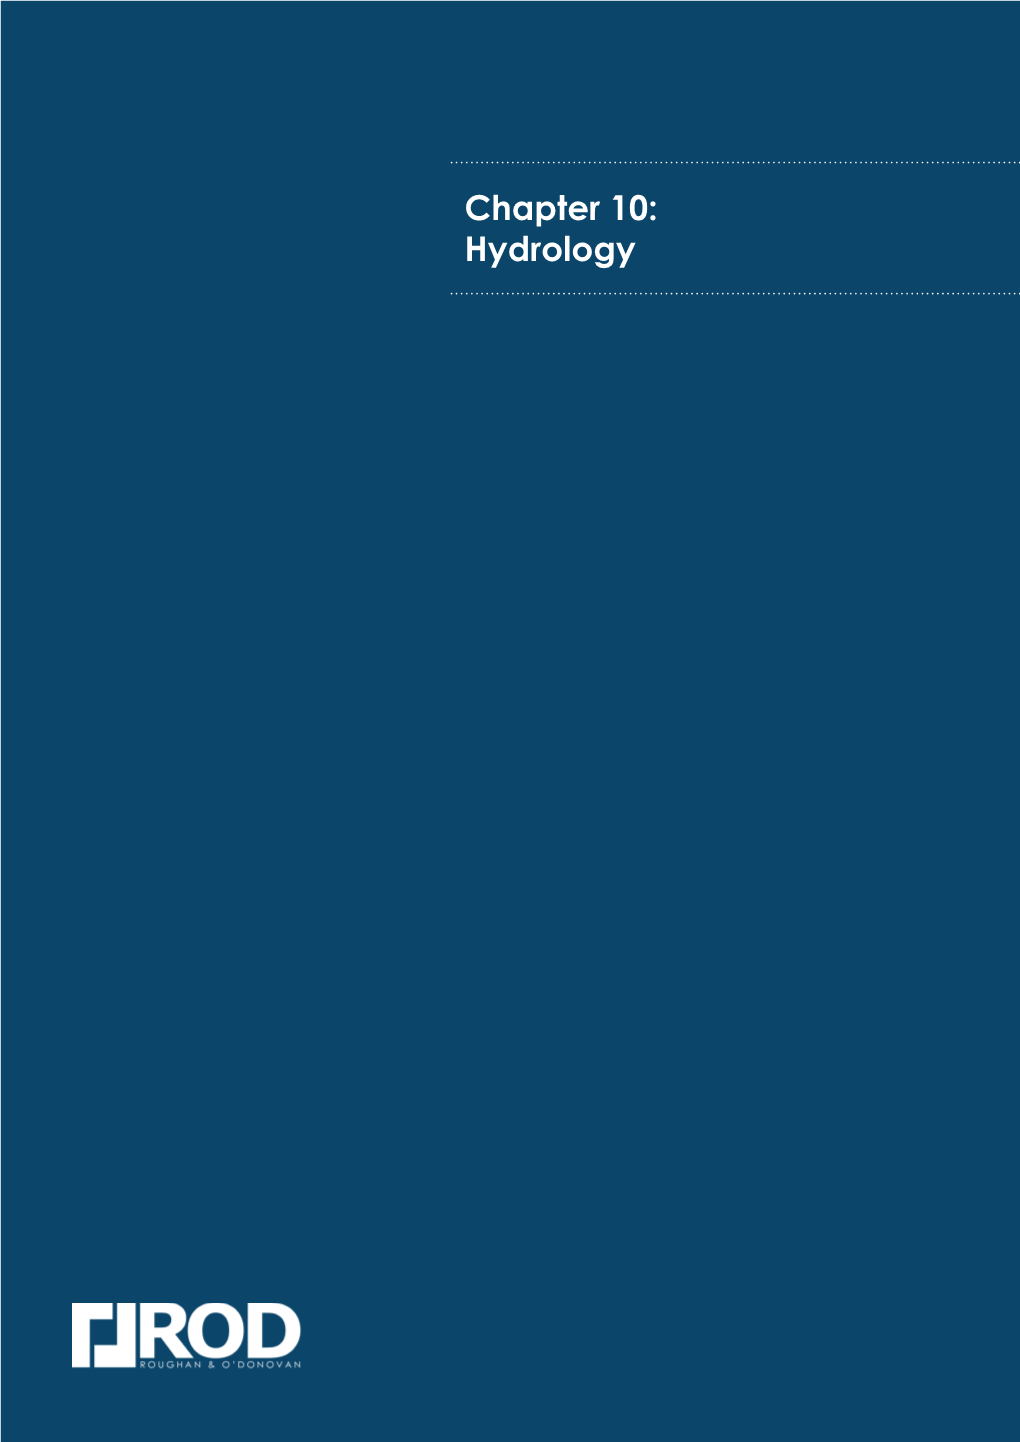 Chapter 10: Hydrology